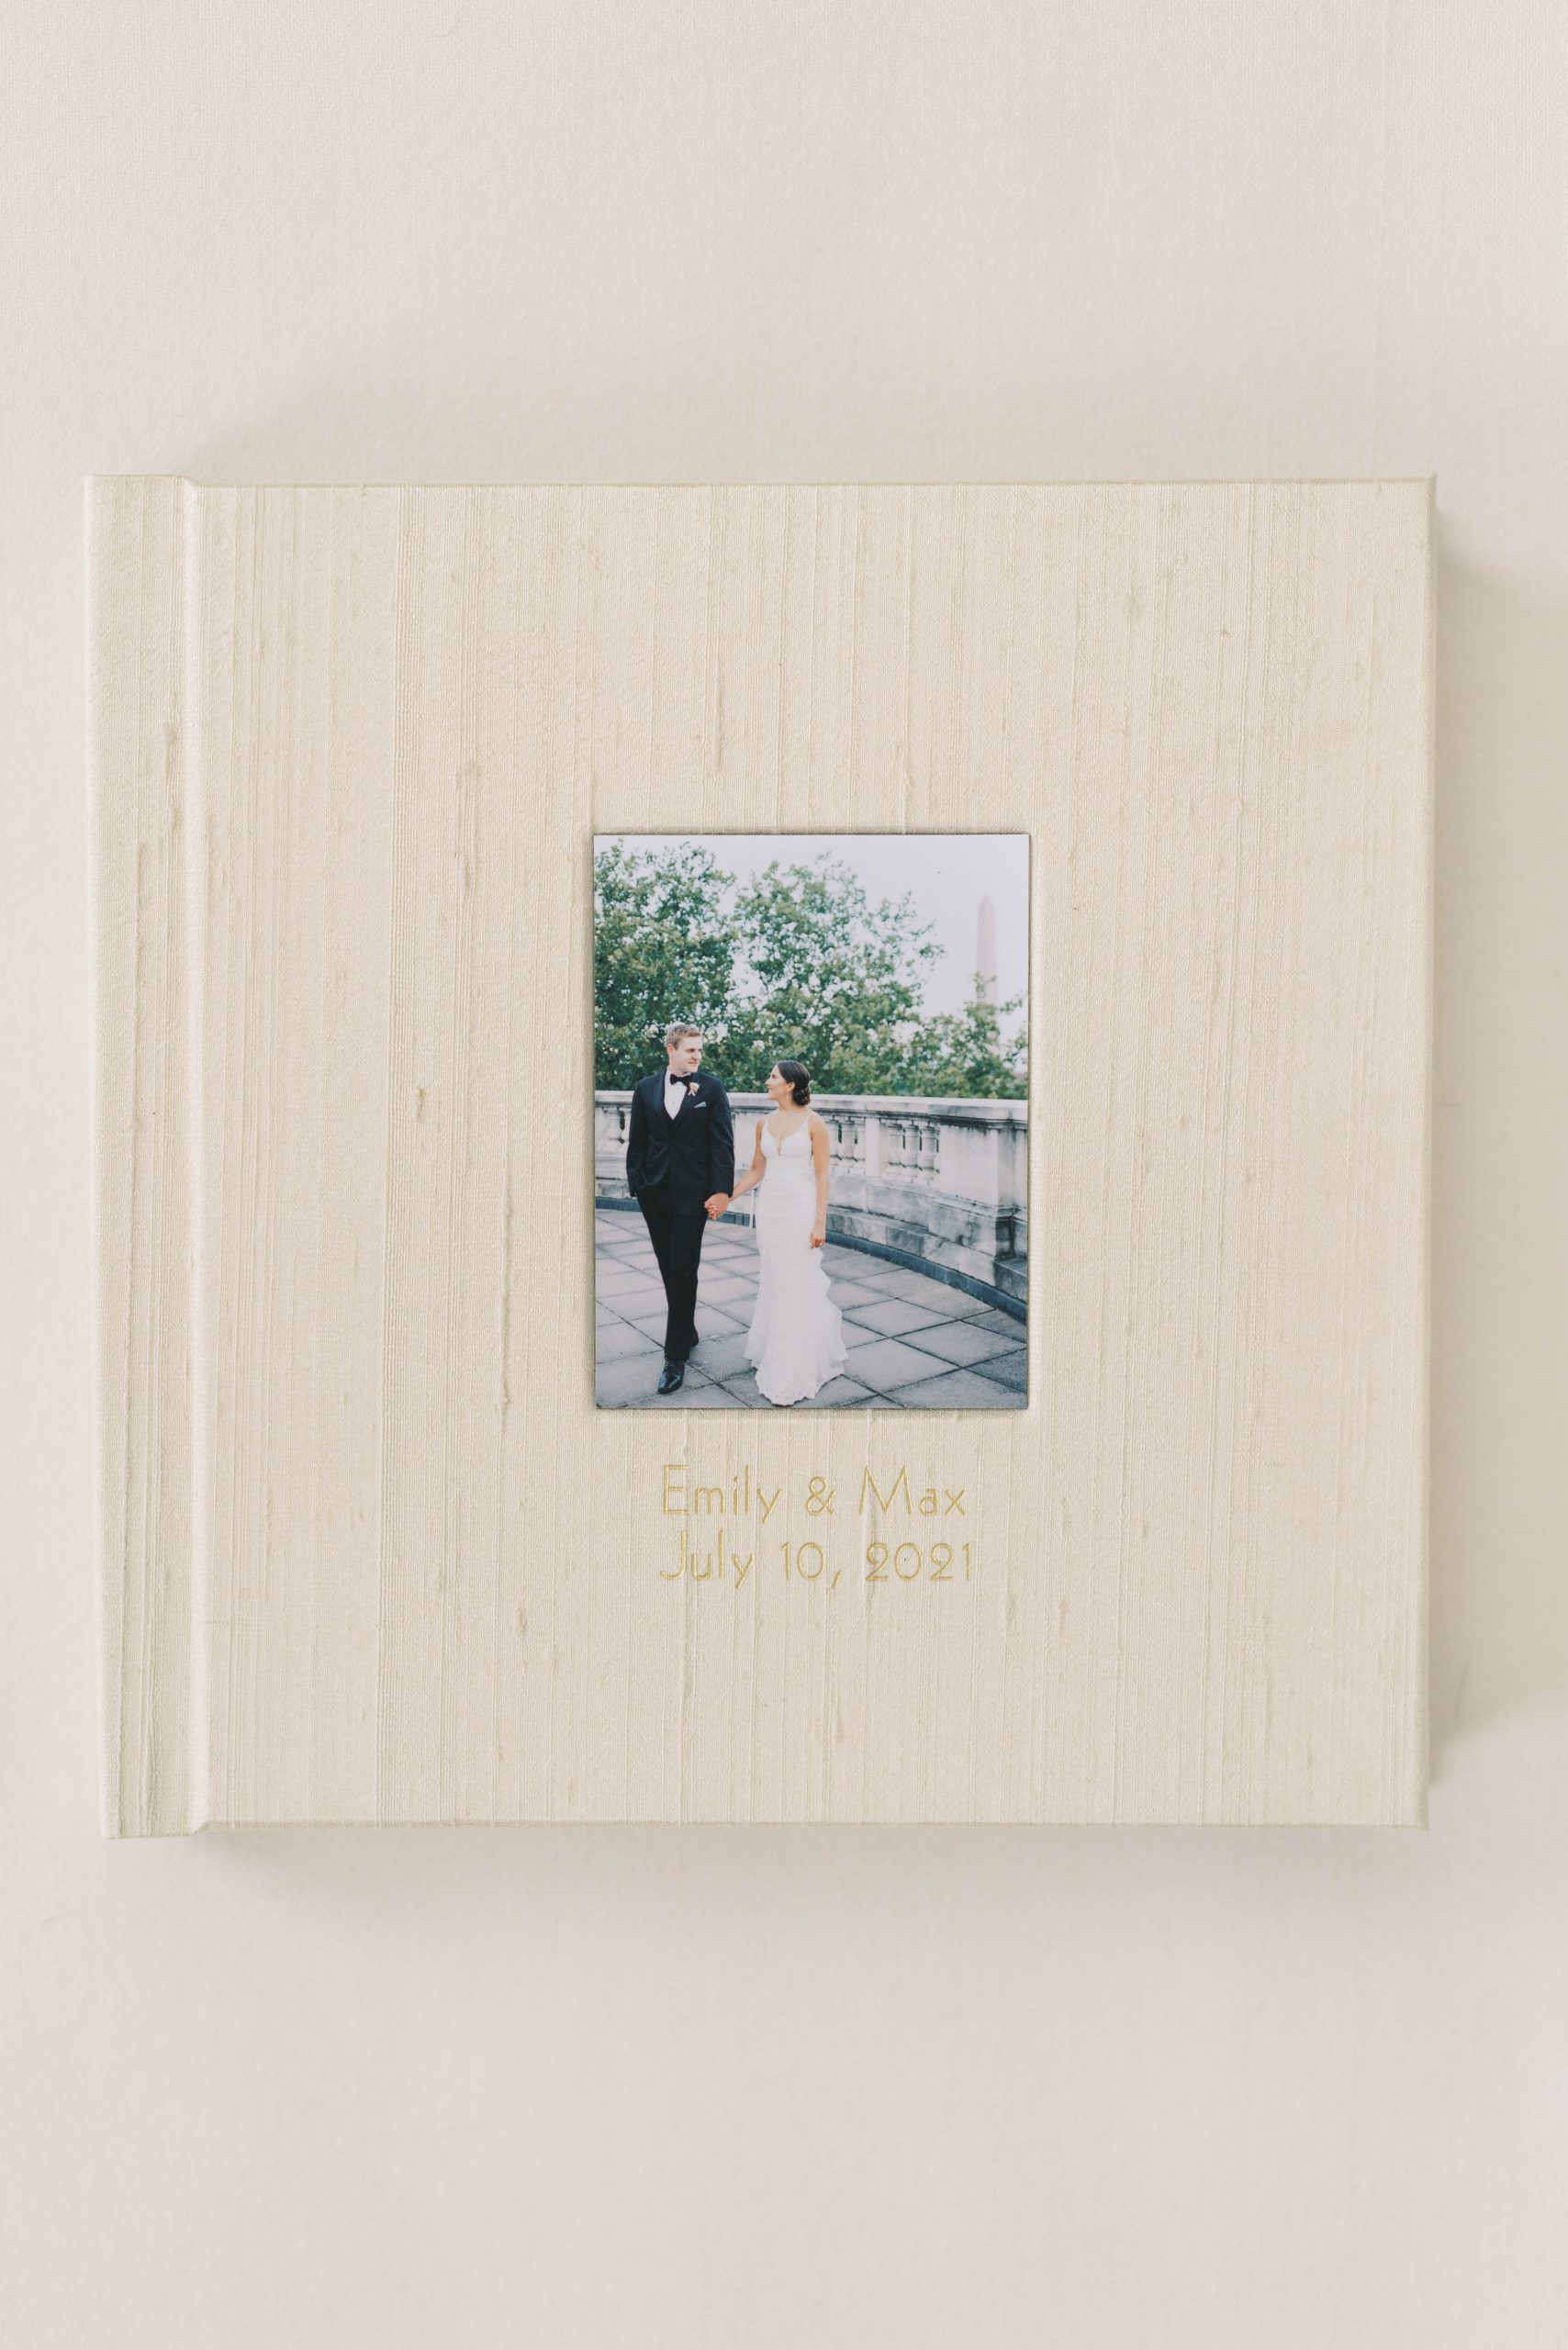 Washington, DC DAR Constitution Hall wedding album in heirloom quality silk. Photographs by Alicia Lacey Photography.